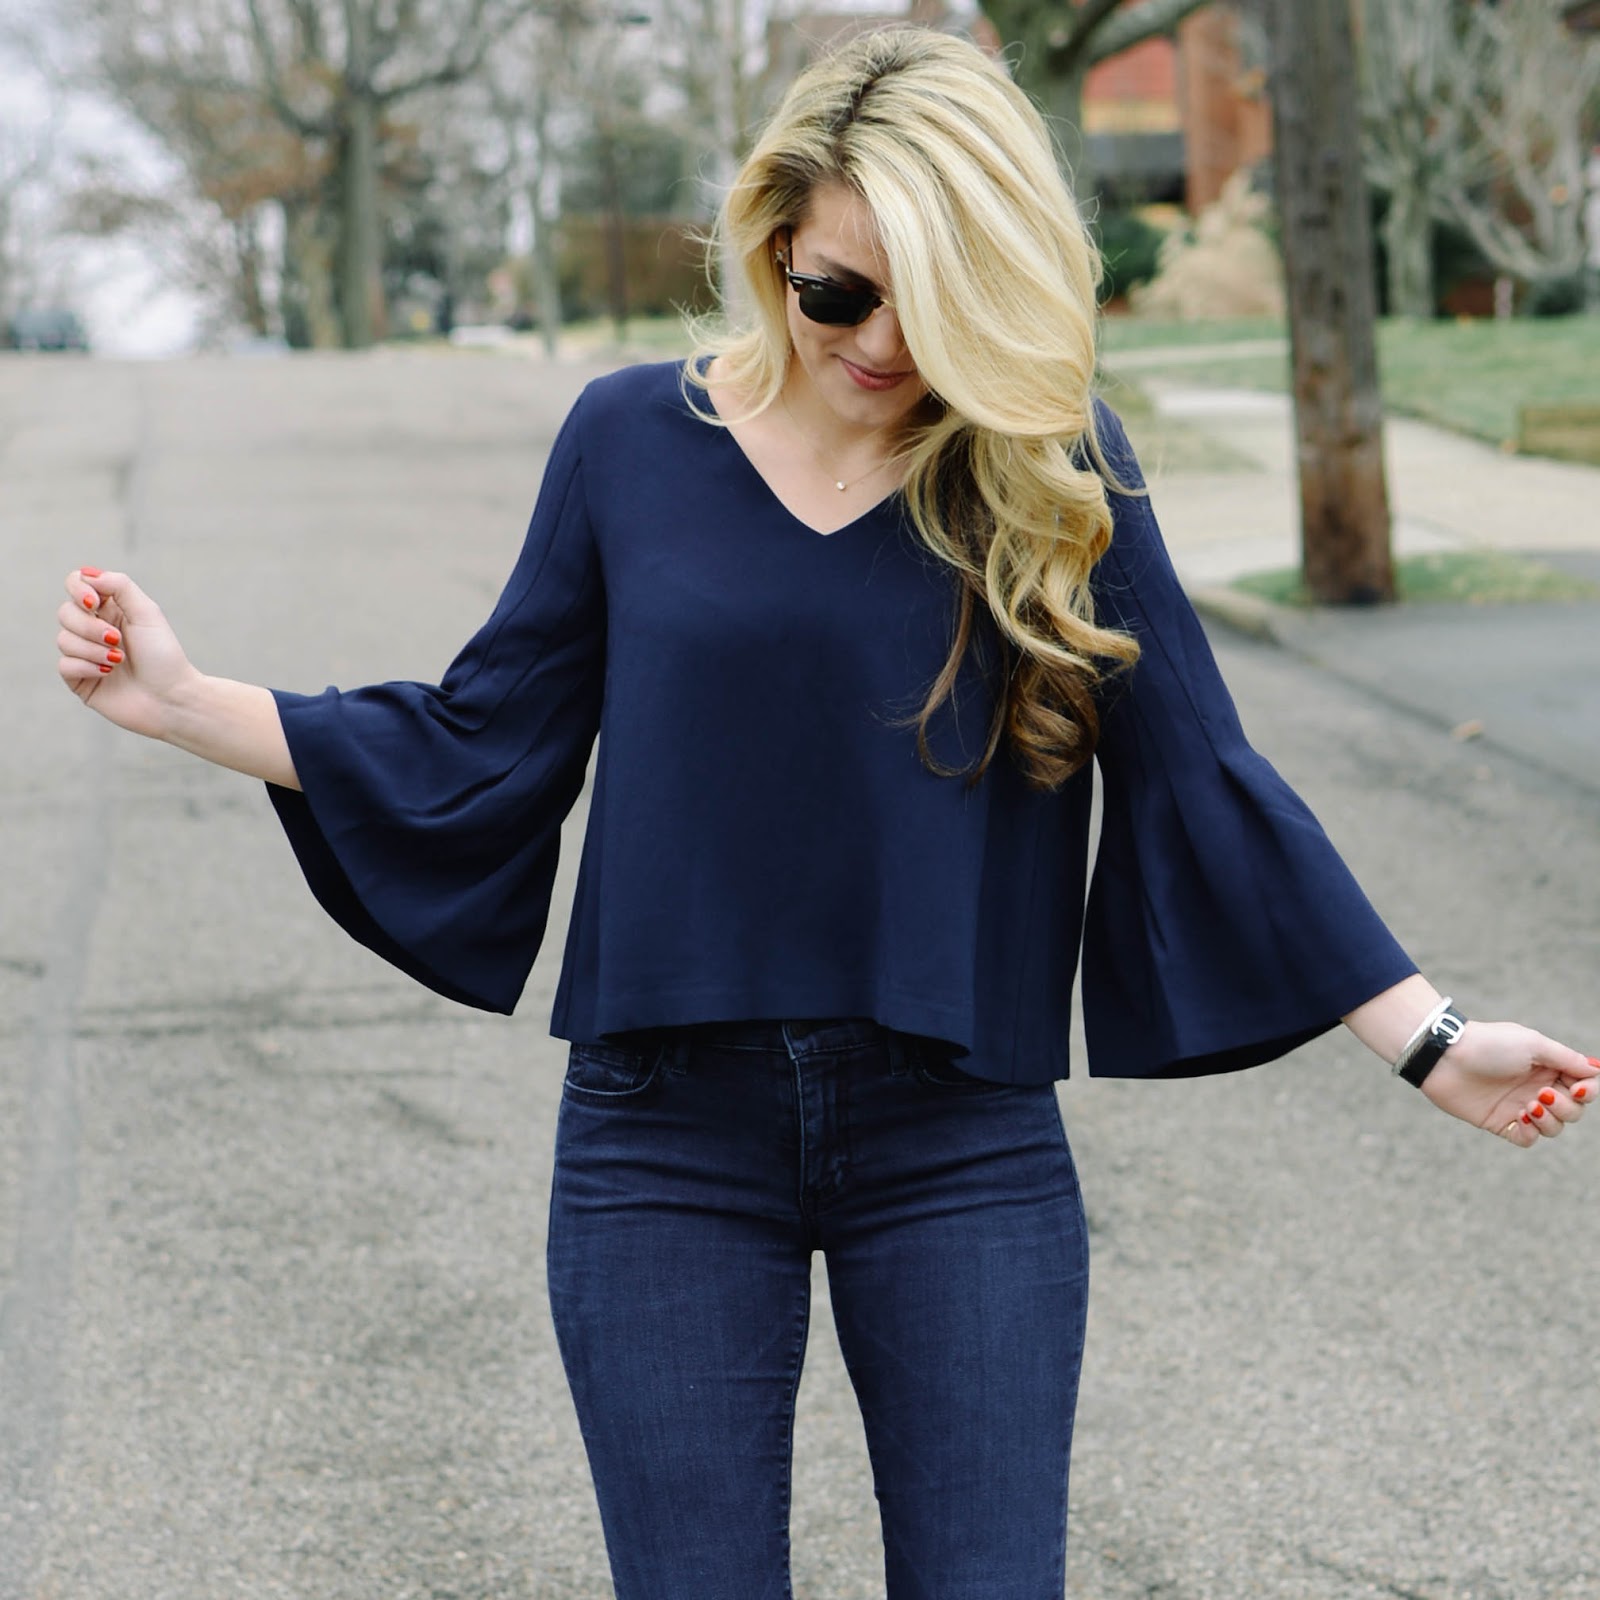 Summer Wind: How to Style a Bell Sleeve Top